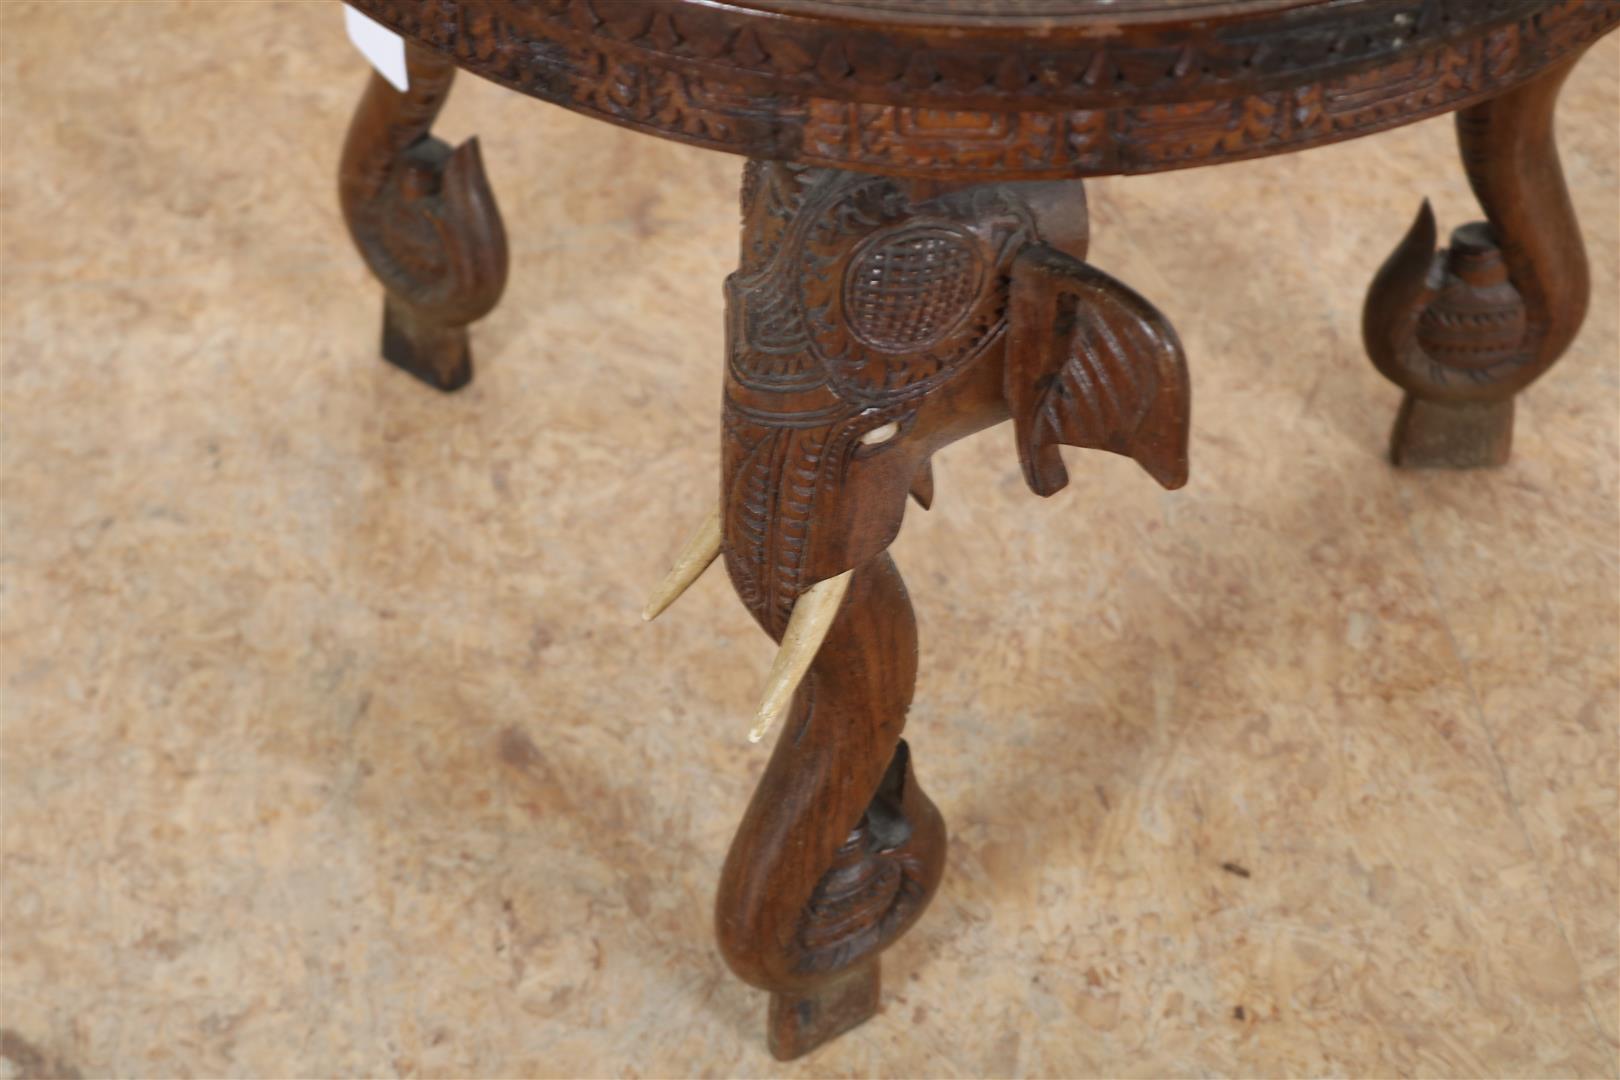 Teak elephant table with bone tusks and floral relief top, India, 39 x 46 cm. - Image 3 of 3